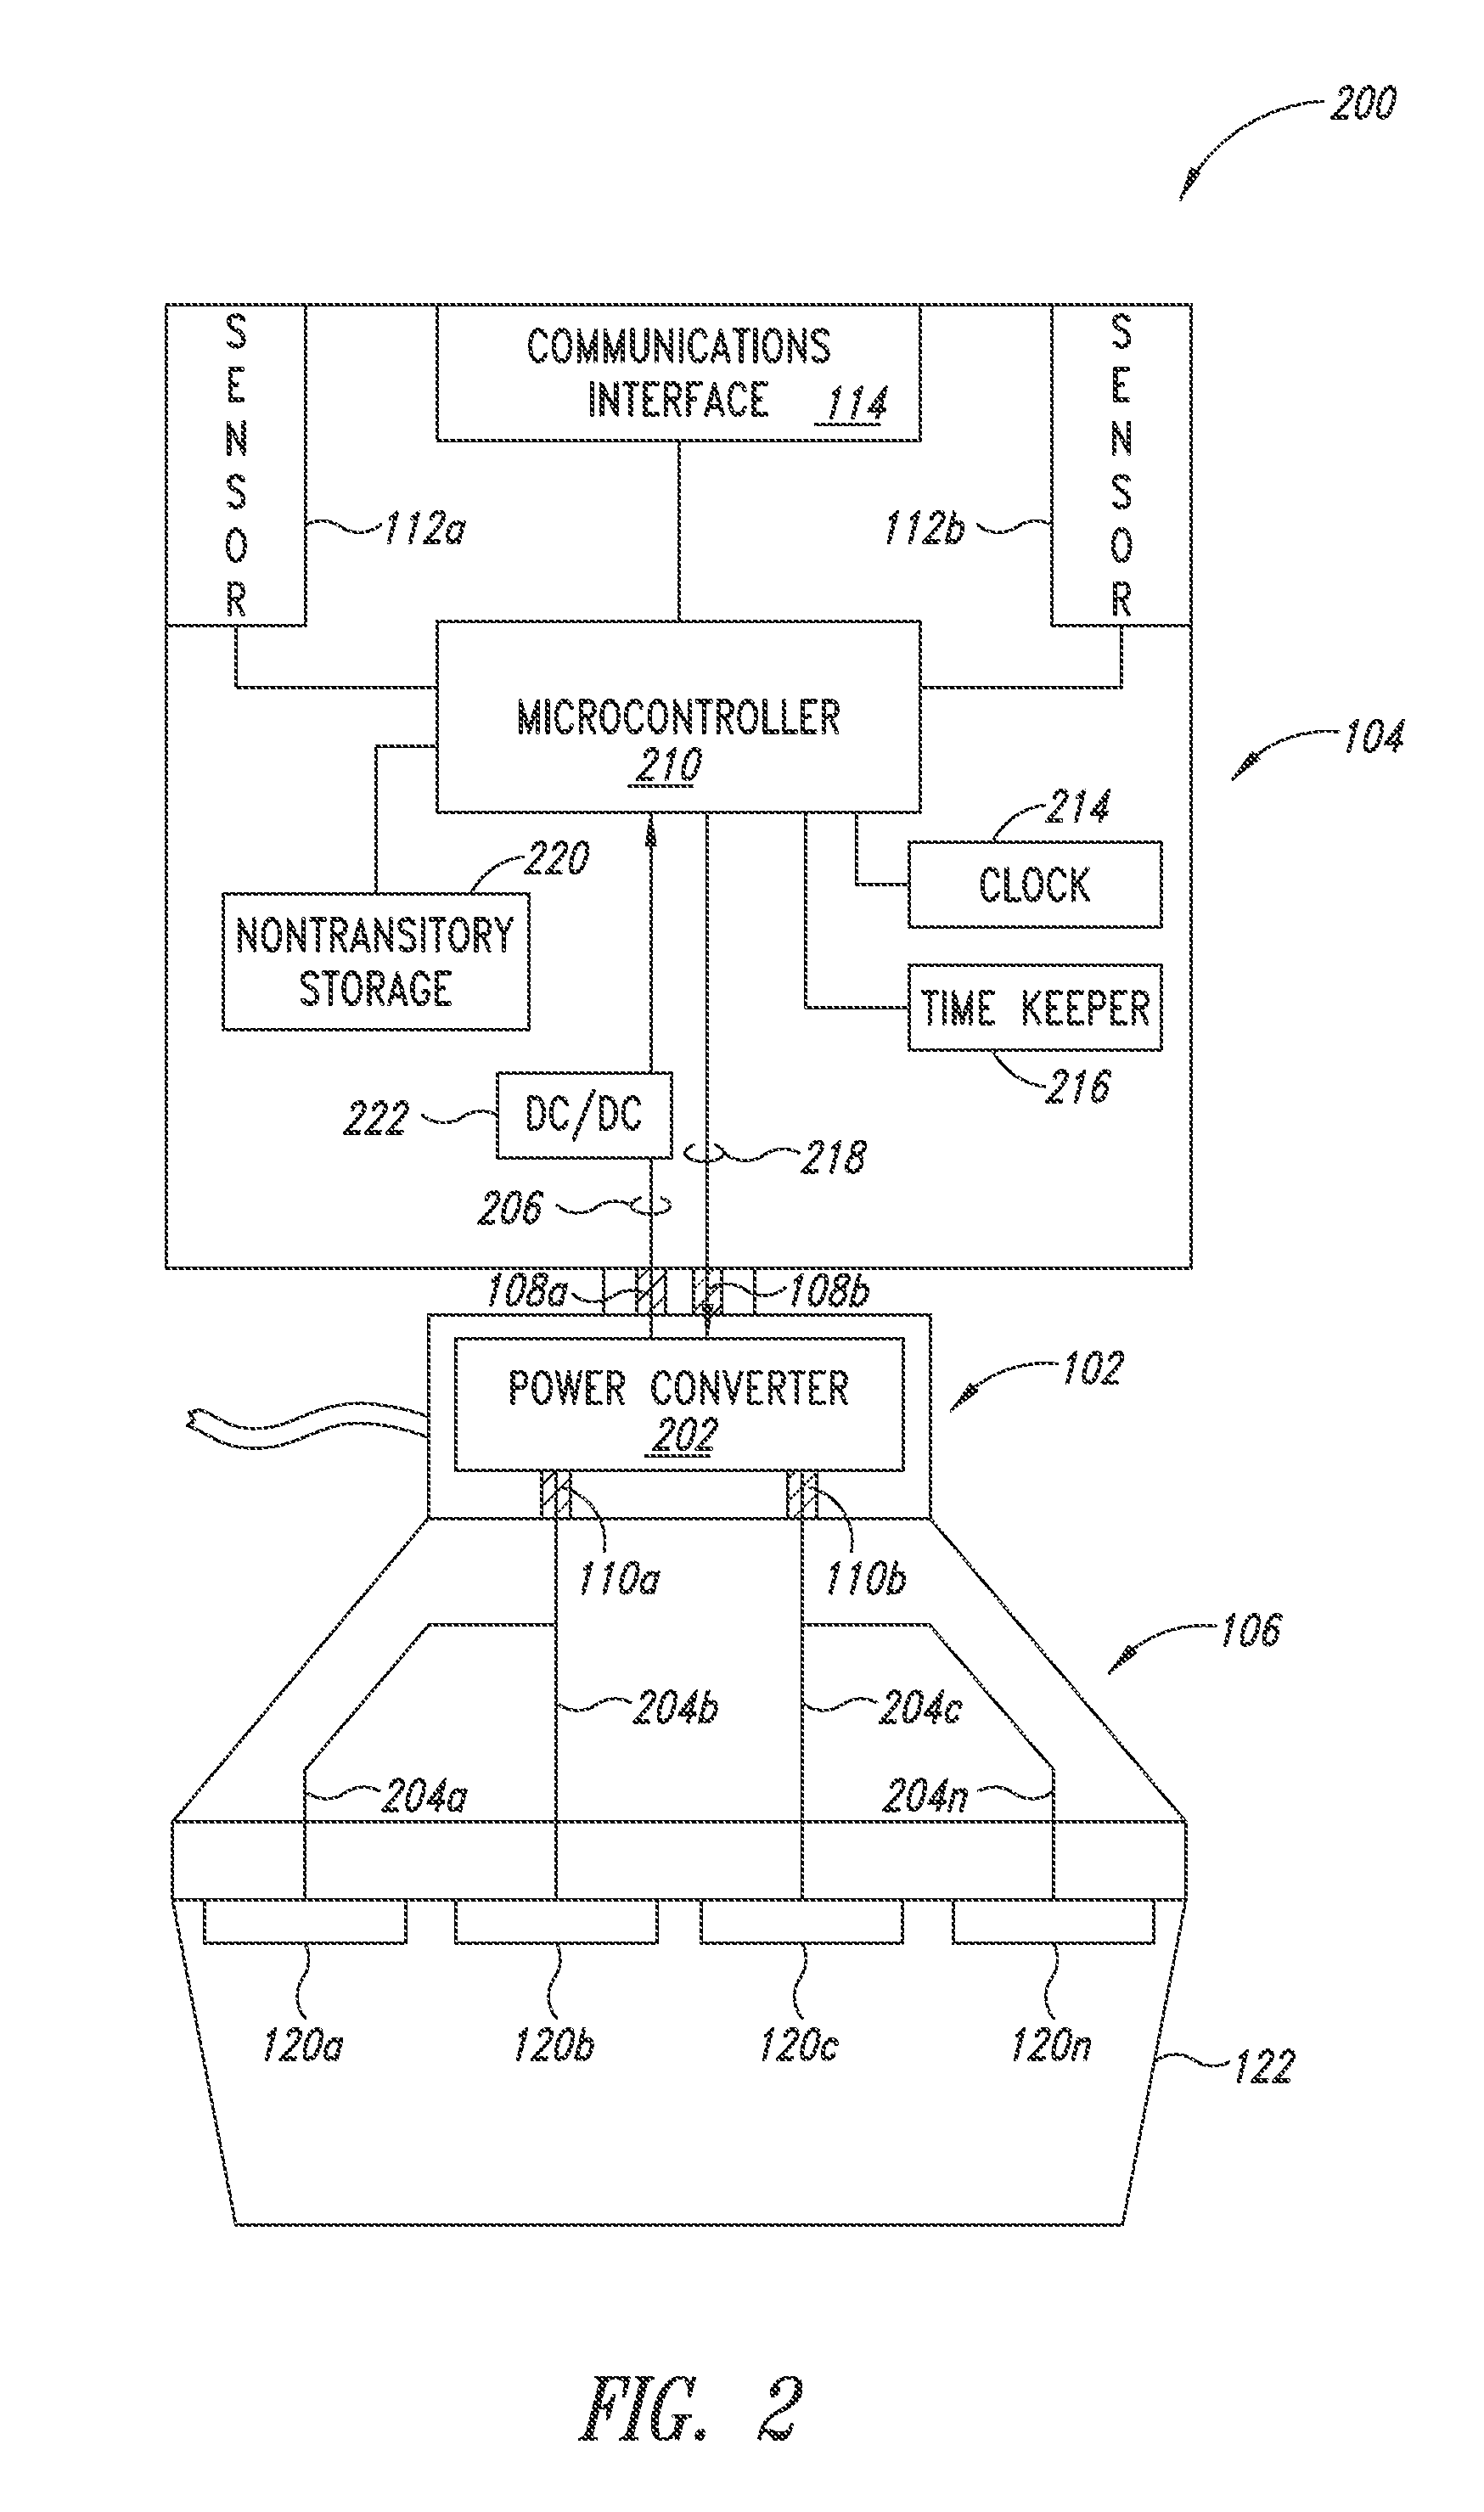 Luminaire with ambient sensing and autonomous control capabilities